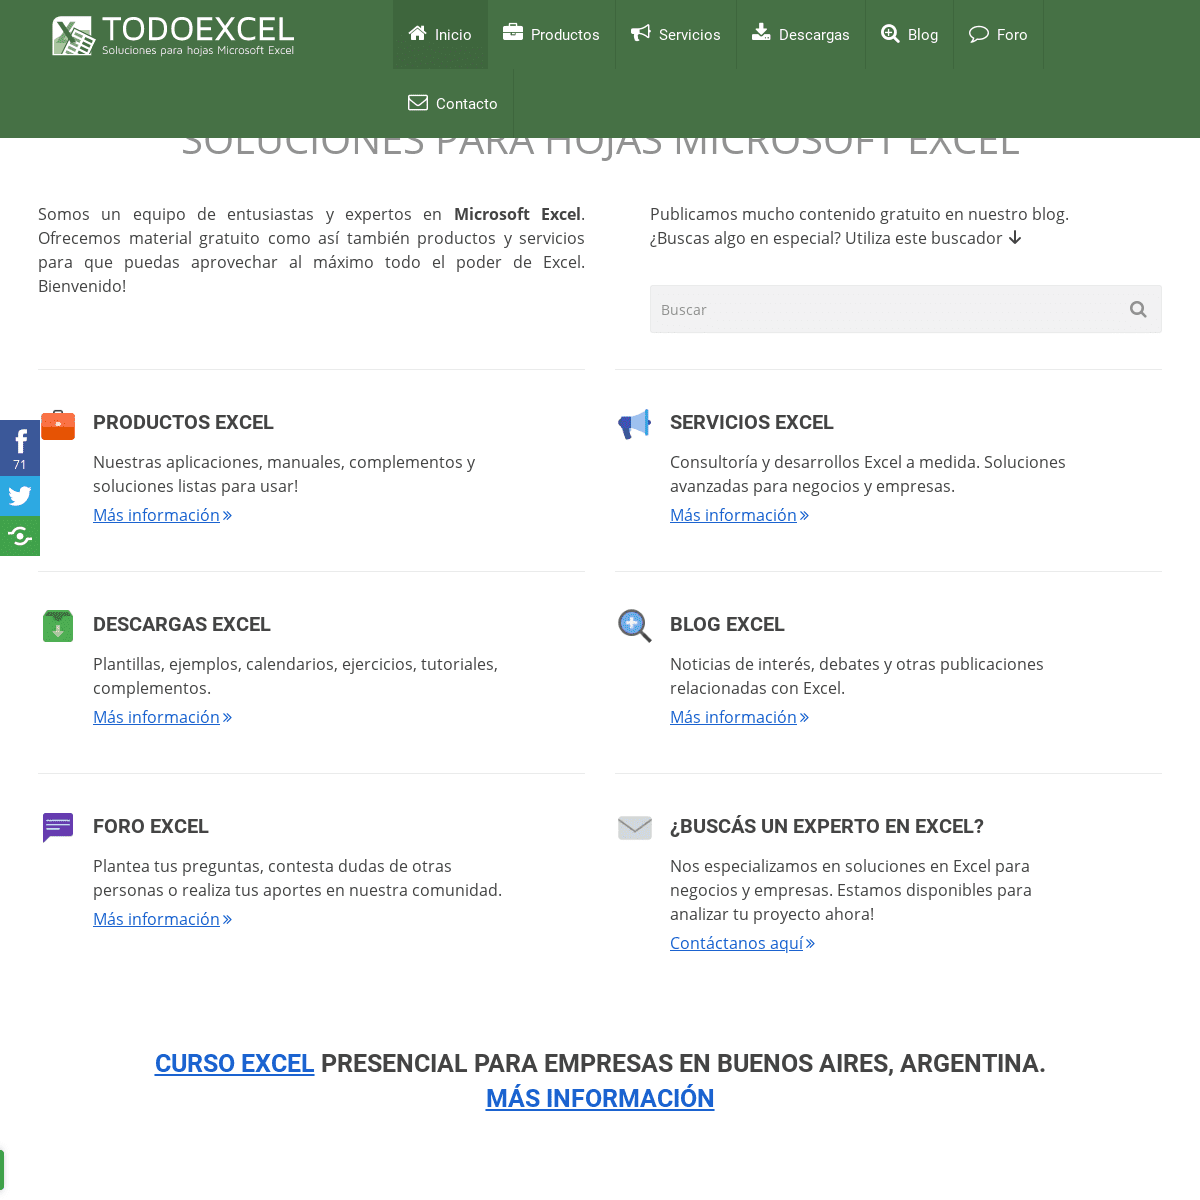 A complete backup of todoexcel.com